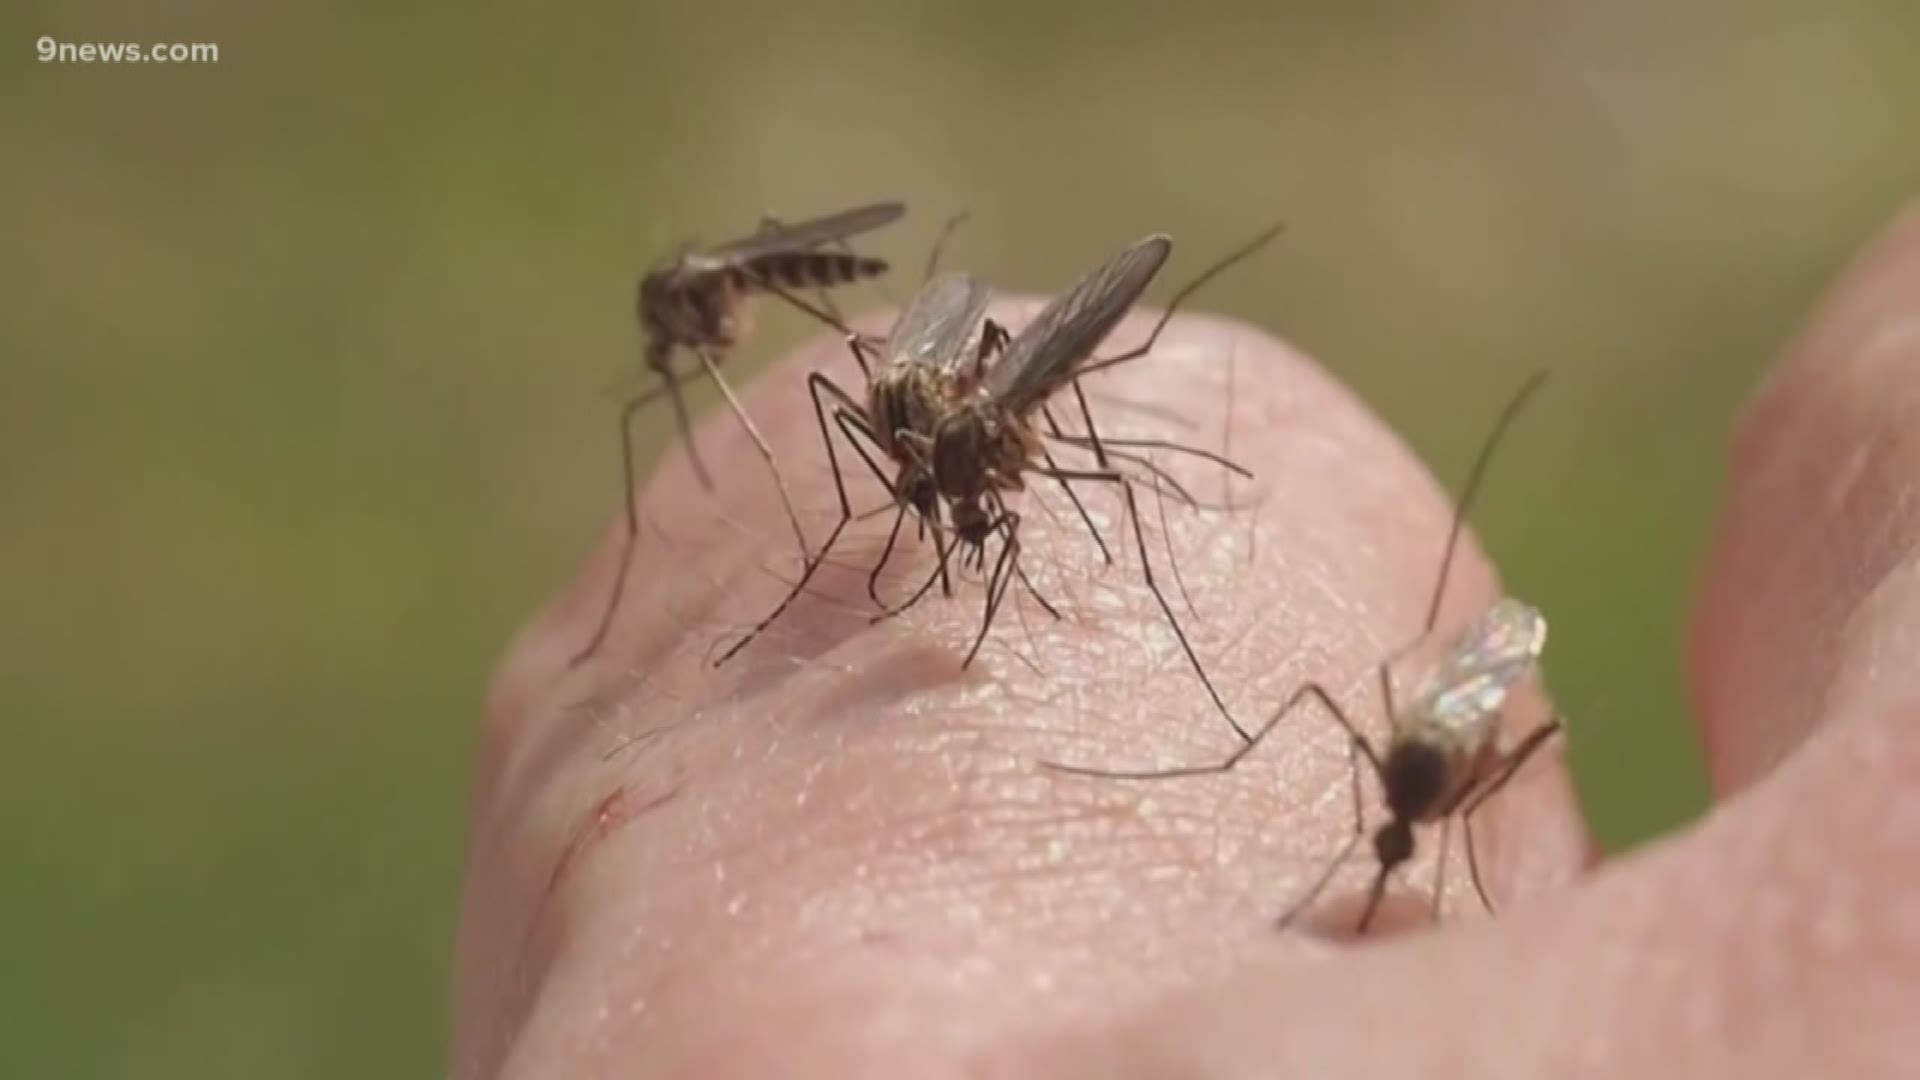 There have been no human cases of West Nile in Adams County so far this year.